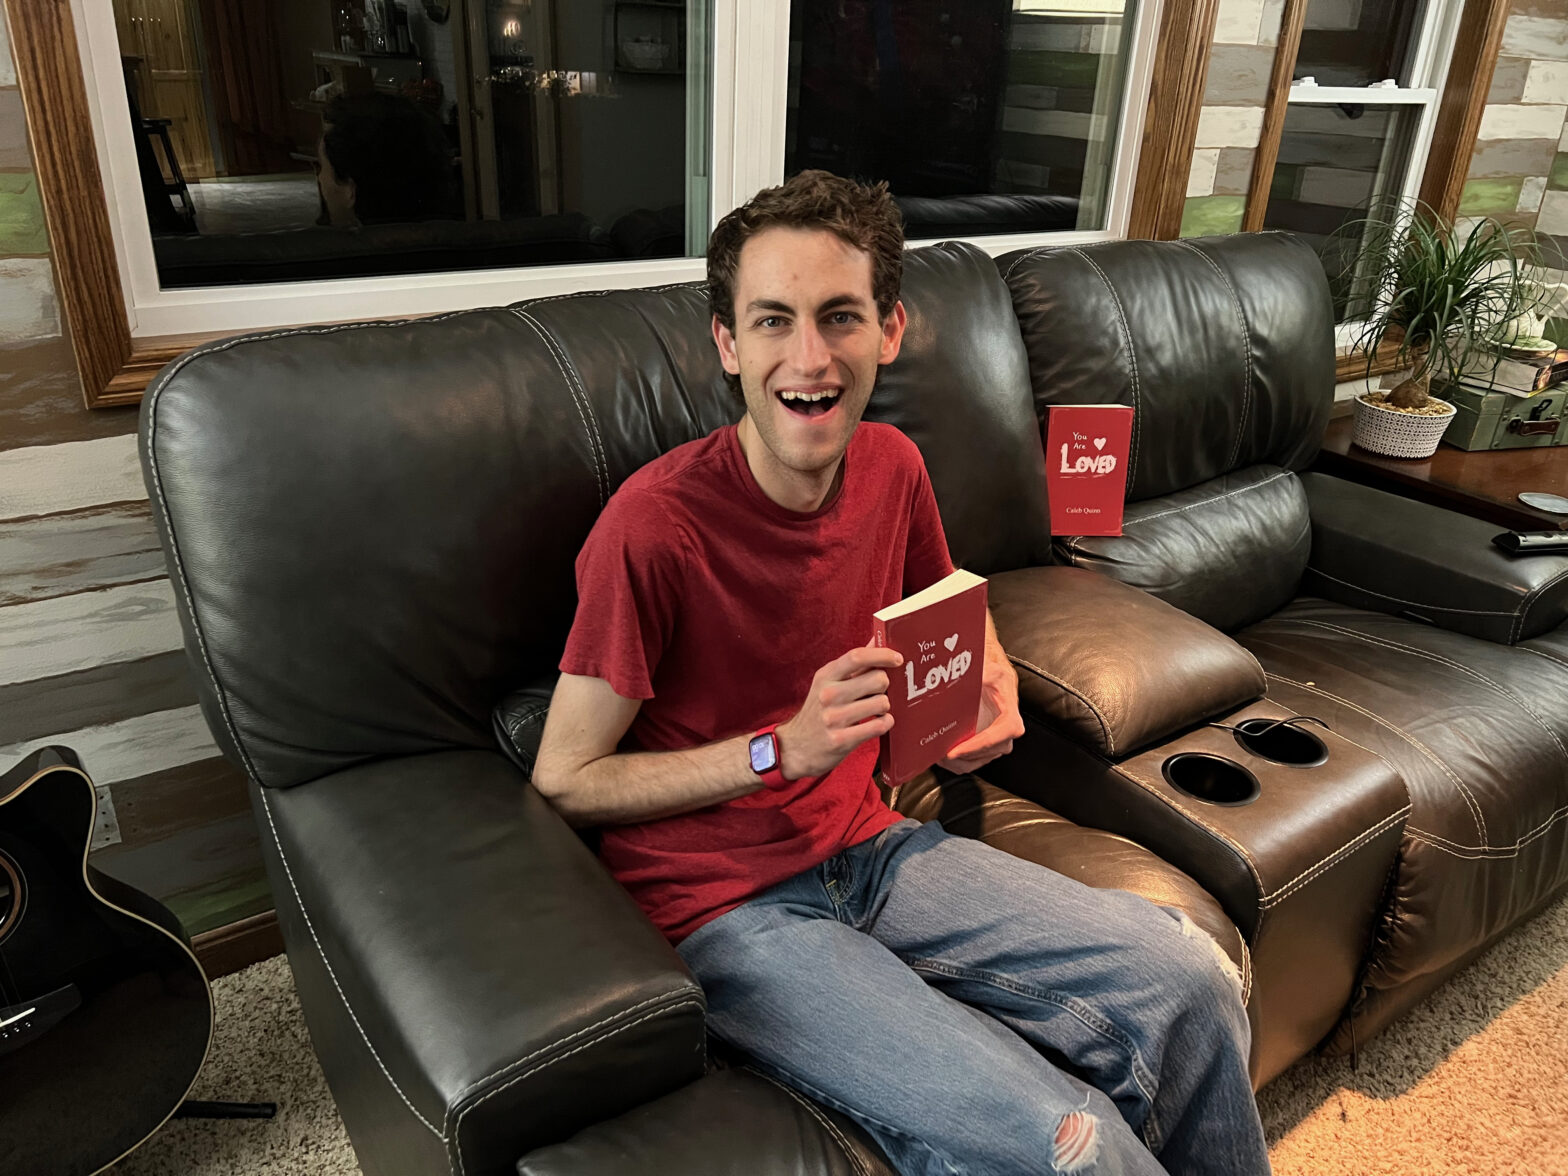 Author Caleb Quinn sits on a couch holding his book, "You Are Loved."